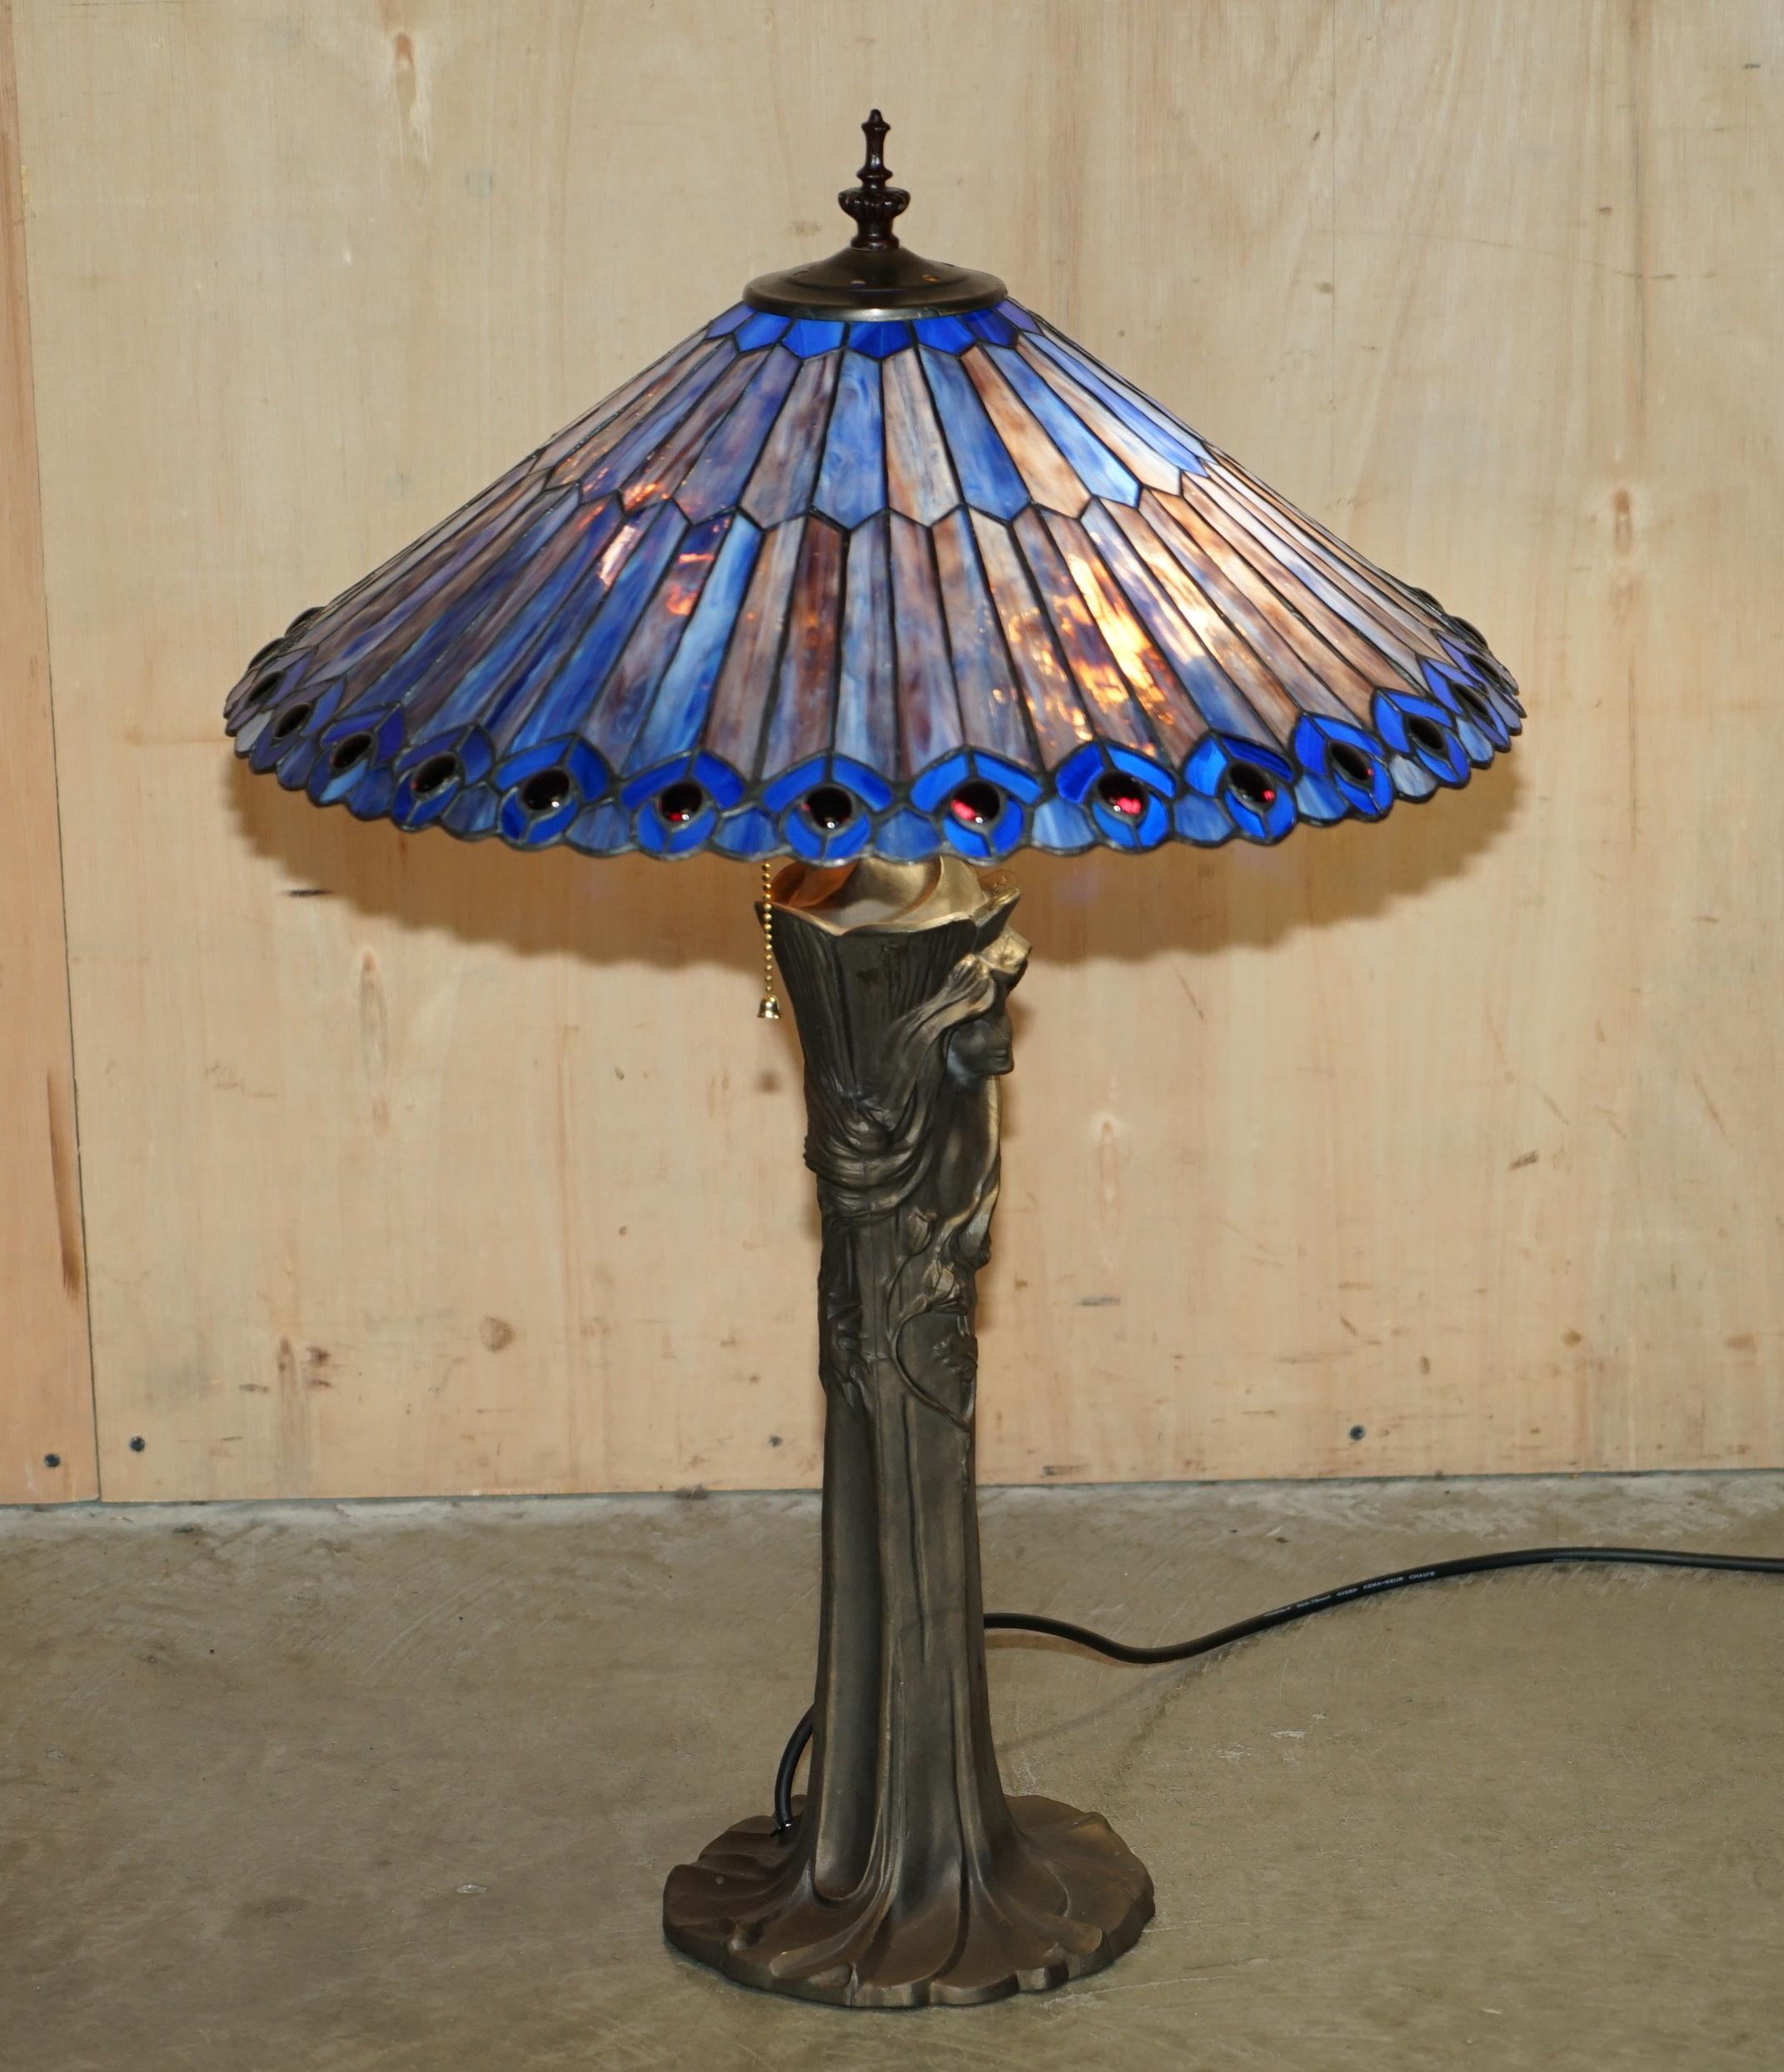 Royal House Antiques

Royal House Antiques is delighted to offer for sale this absolutely stunning pair of circa 1940's Art Nouveau style large table lamps with bronzed frames and exquisite shades 

Please note the delivery fee listed is just a